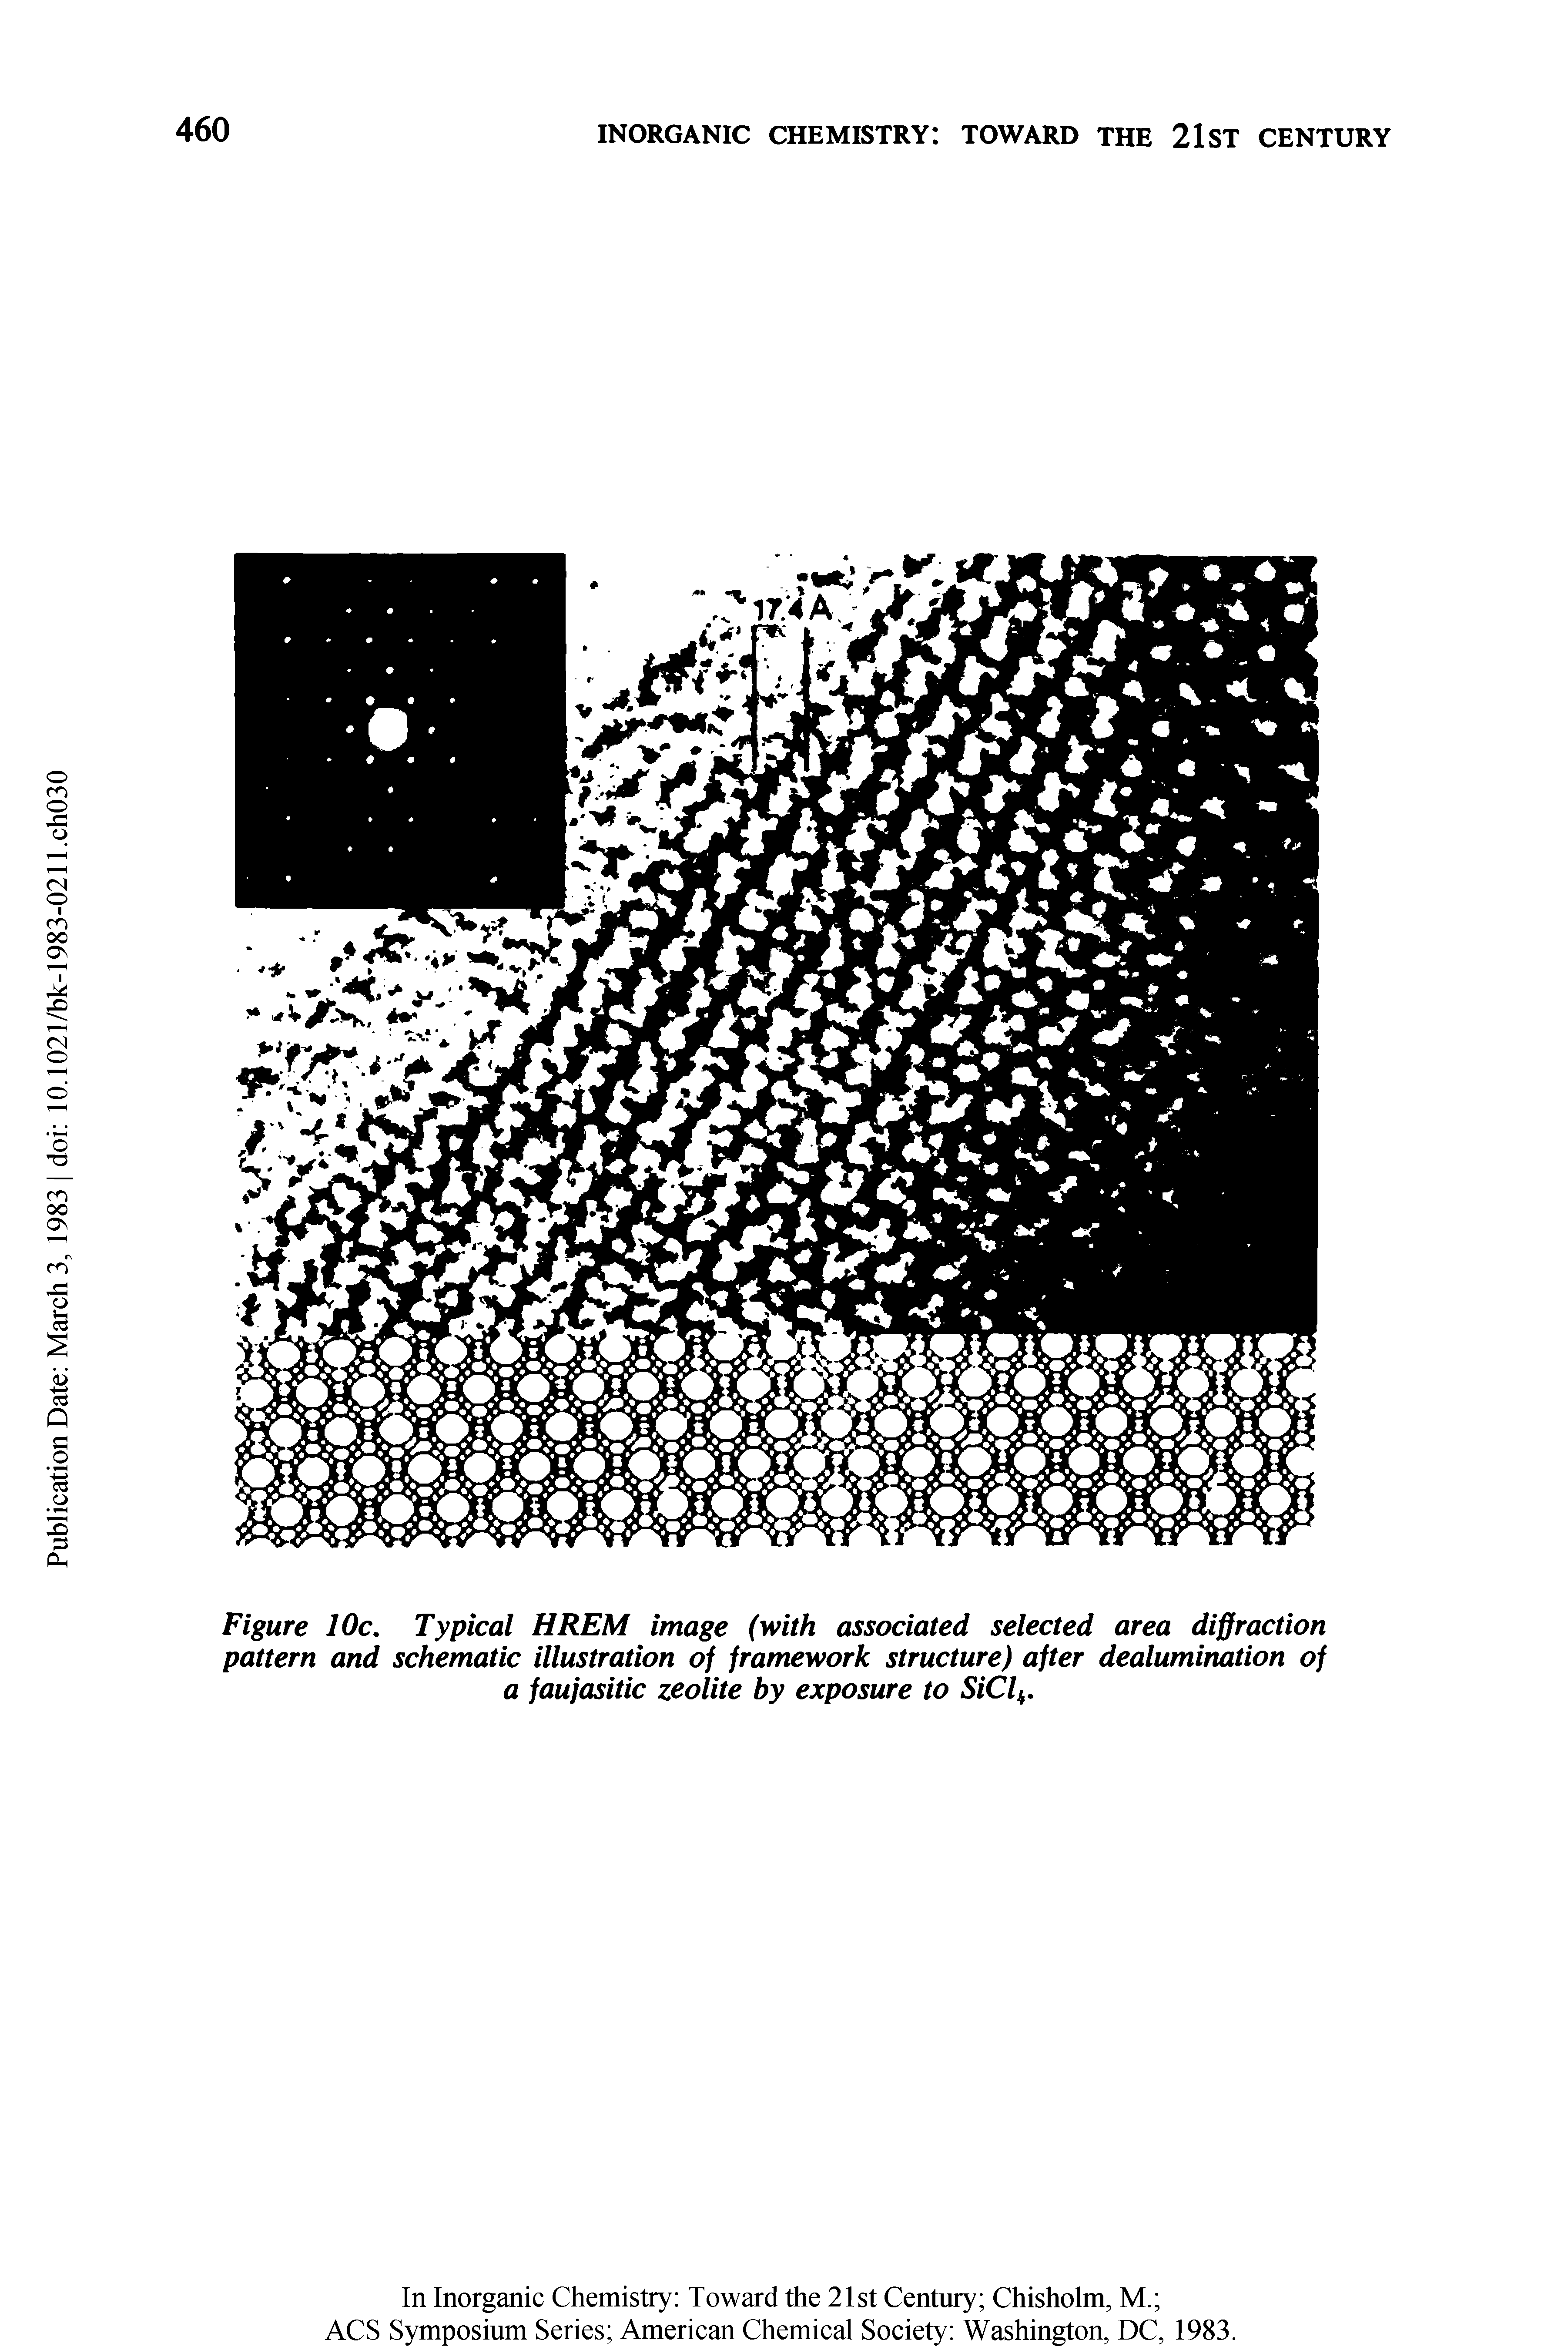 Figure 10c. Typical HREM image (with associated selected area diffraction pattern and schematic illustration of framework structure) after dealumination of a faufasitic zeolite by exposure to SiCl4.